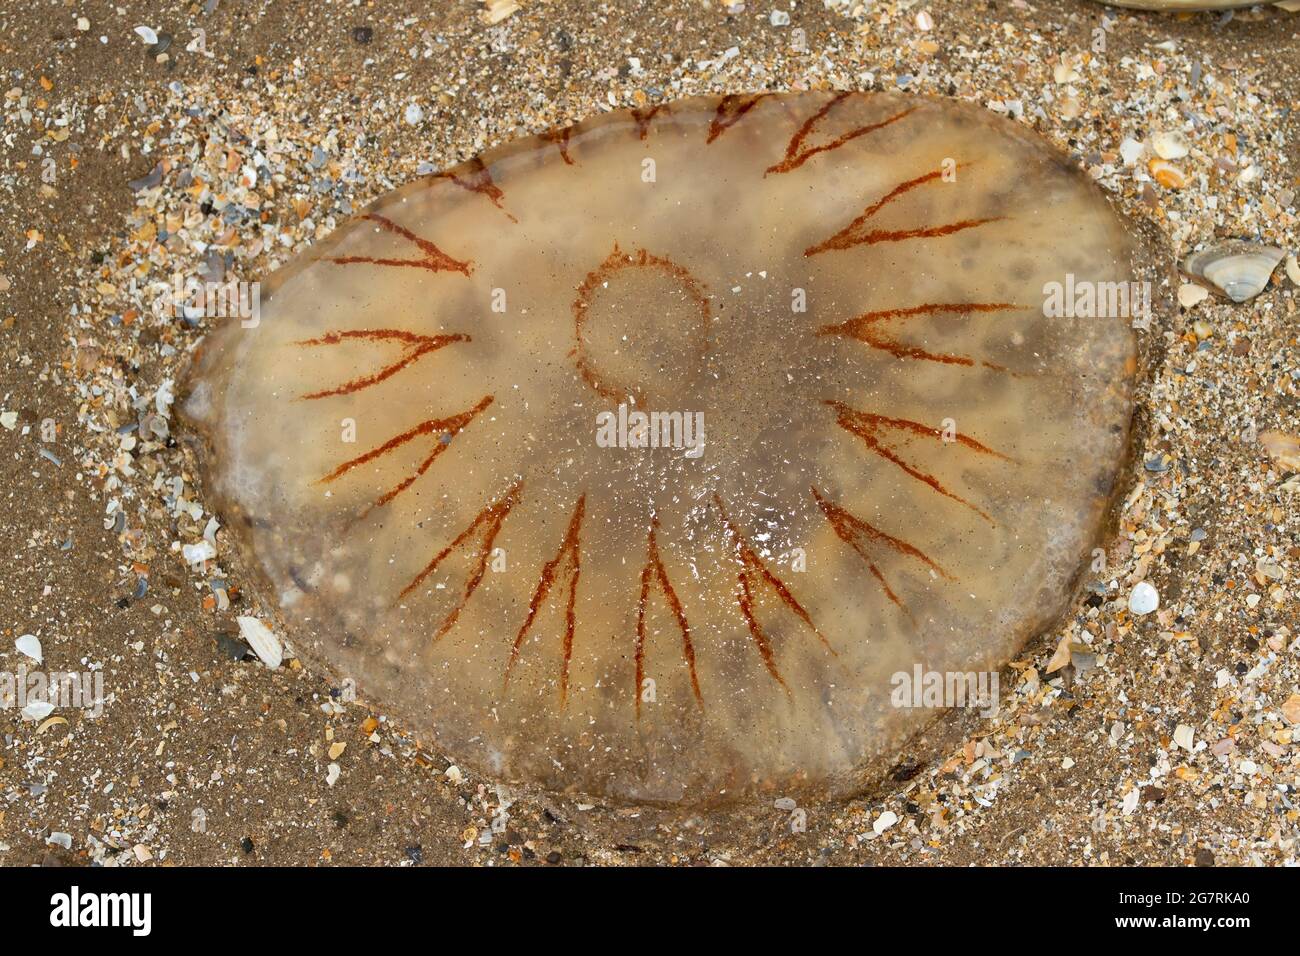 The Compass Jellyfish has distinctive V shaped markings and is a common visitor to inshore waters in the summer time. Their 24 stinging tentacles Stock Photo